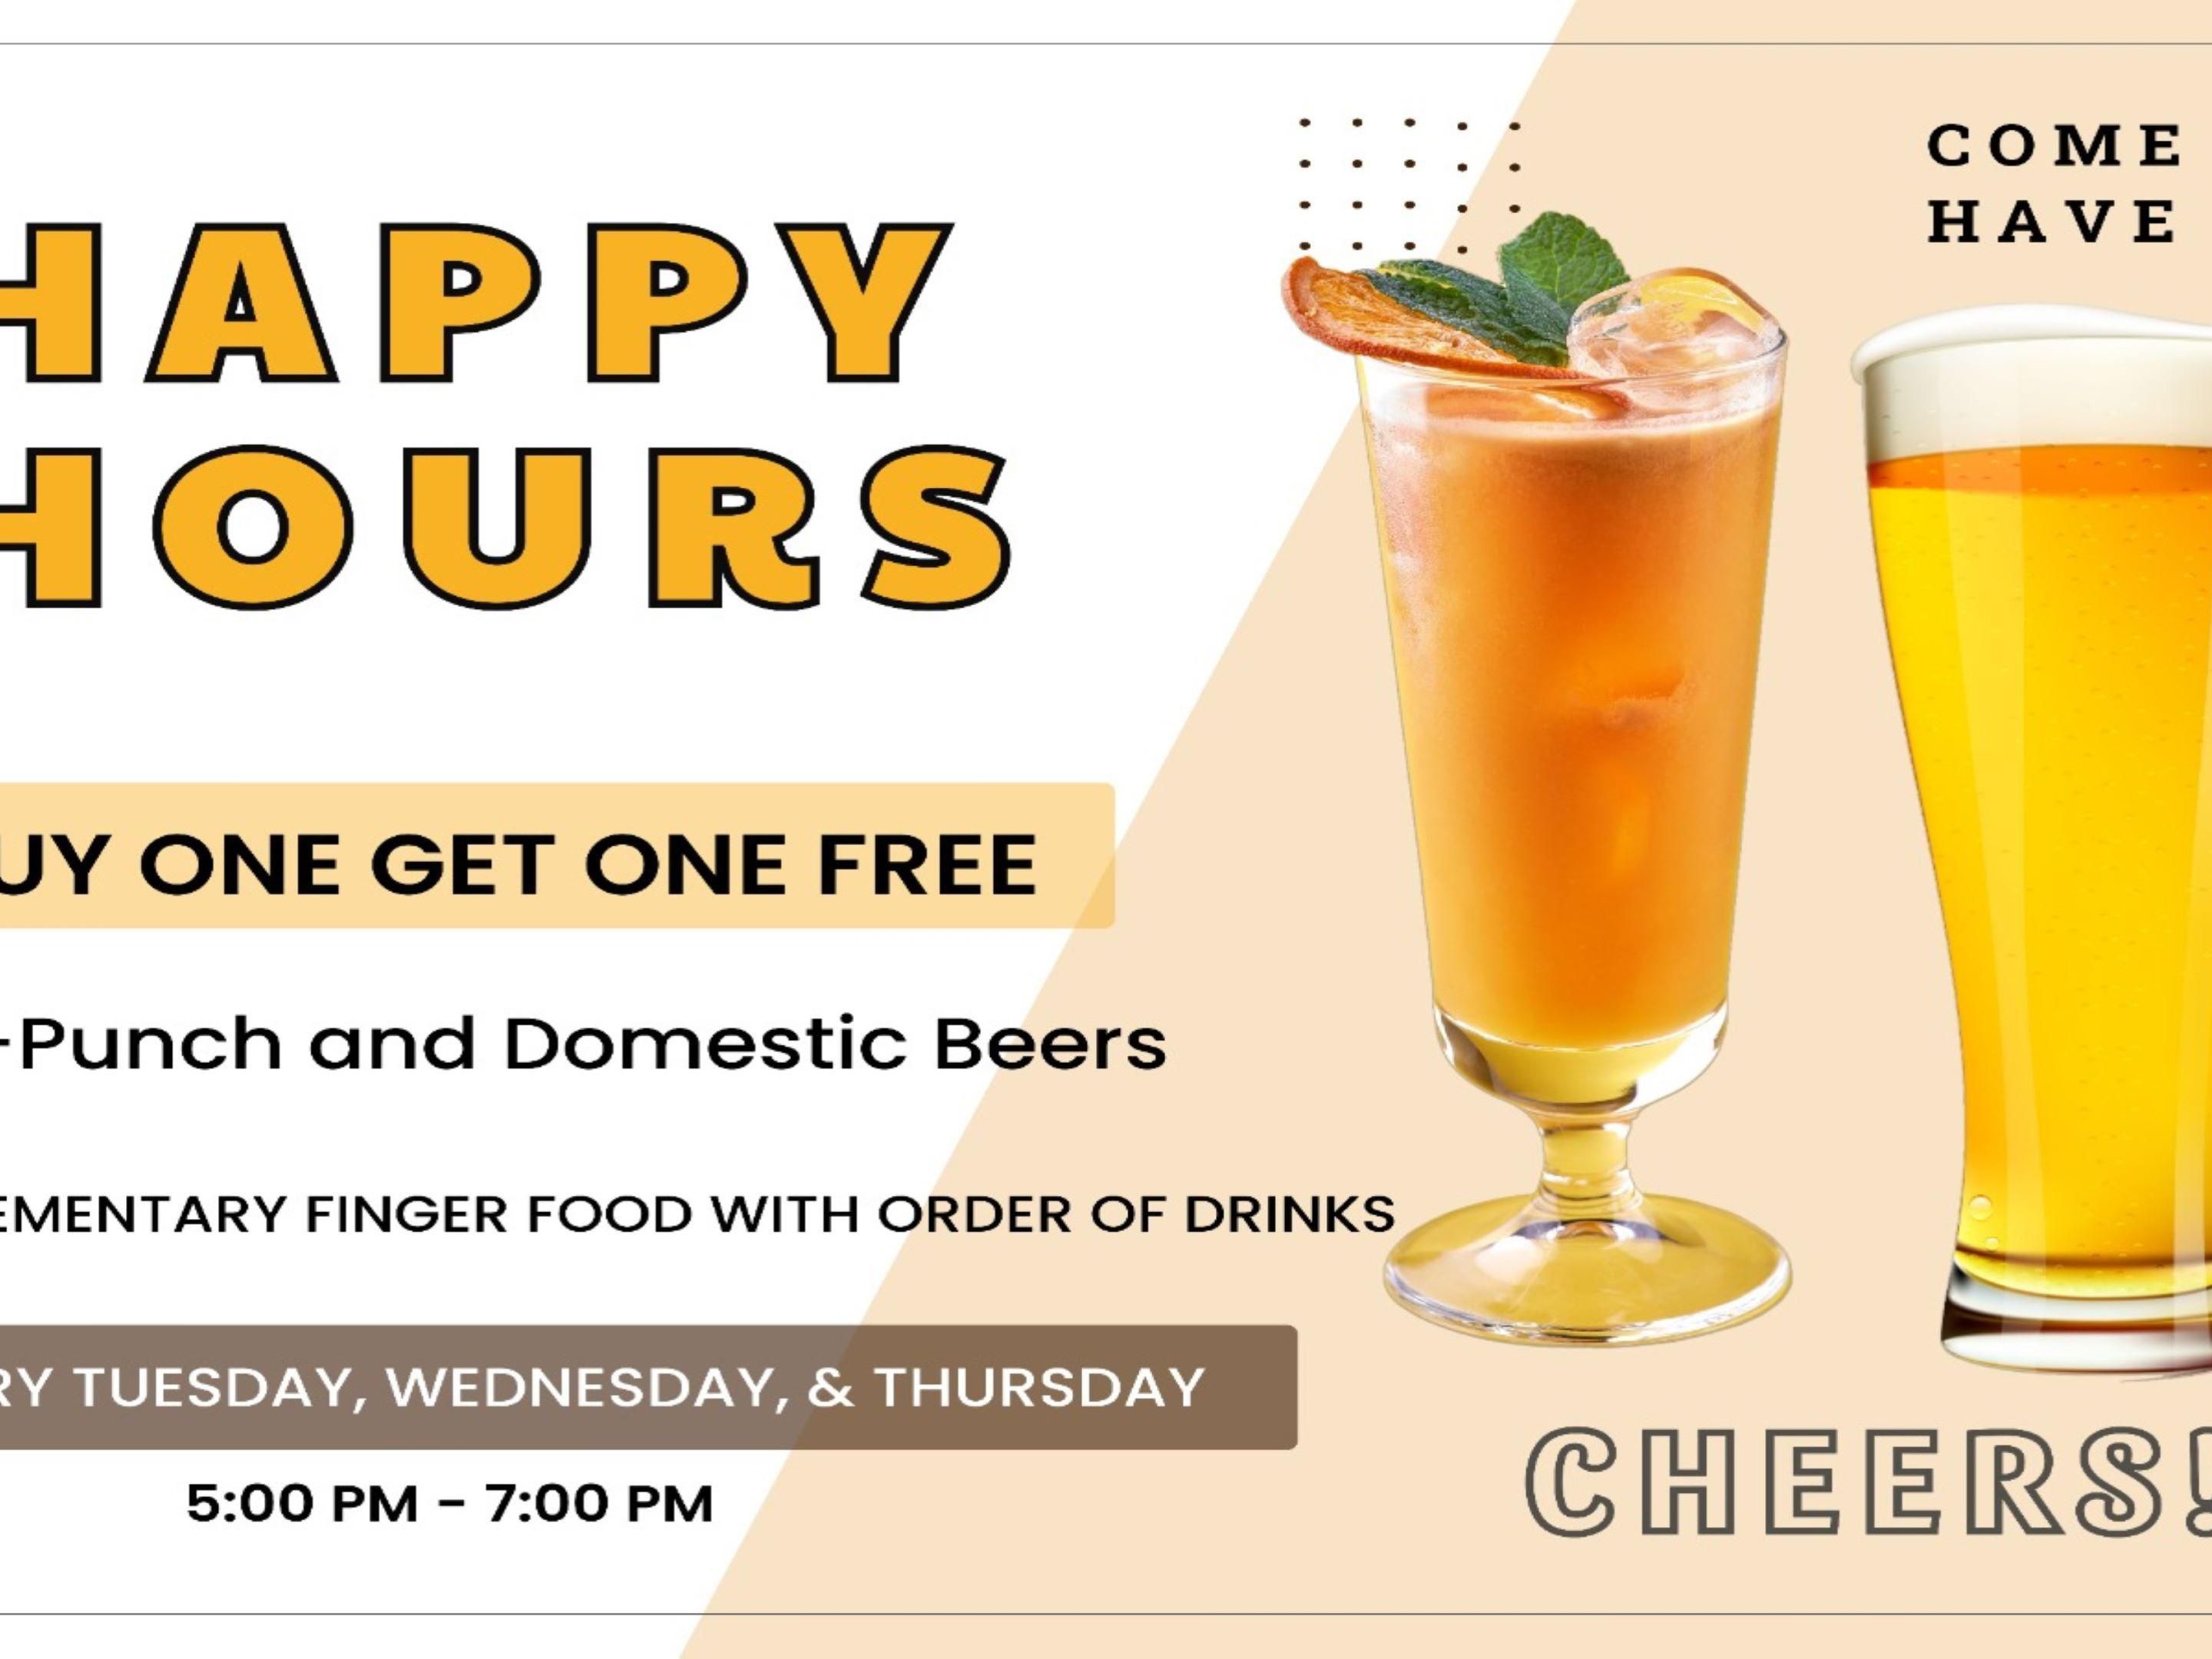 Check out Holiday Inn Mobile's new Happy Hours! Every Tuesday, Wednesday, and Thursday 5pm-7pm. Offering specials and complimentary finger food with an order of drinks.